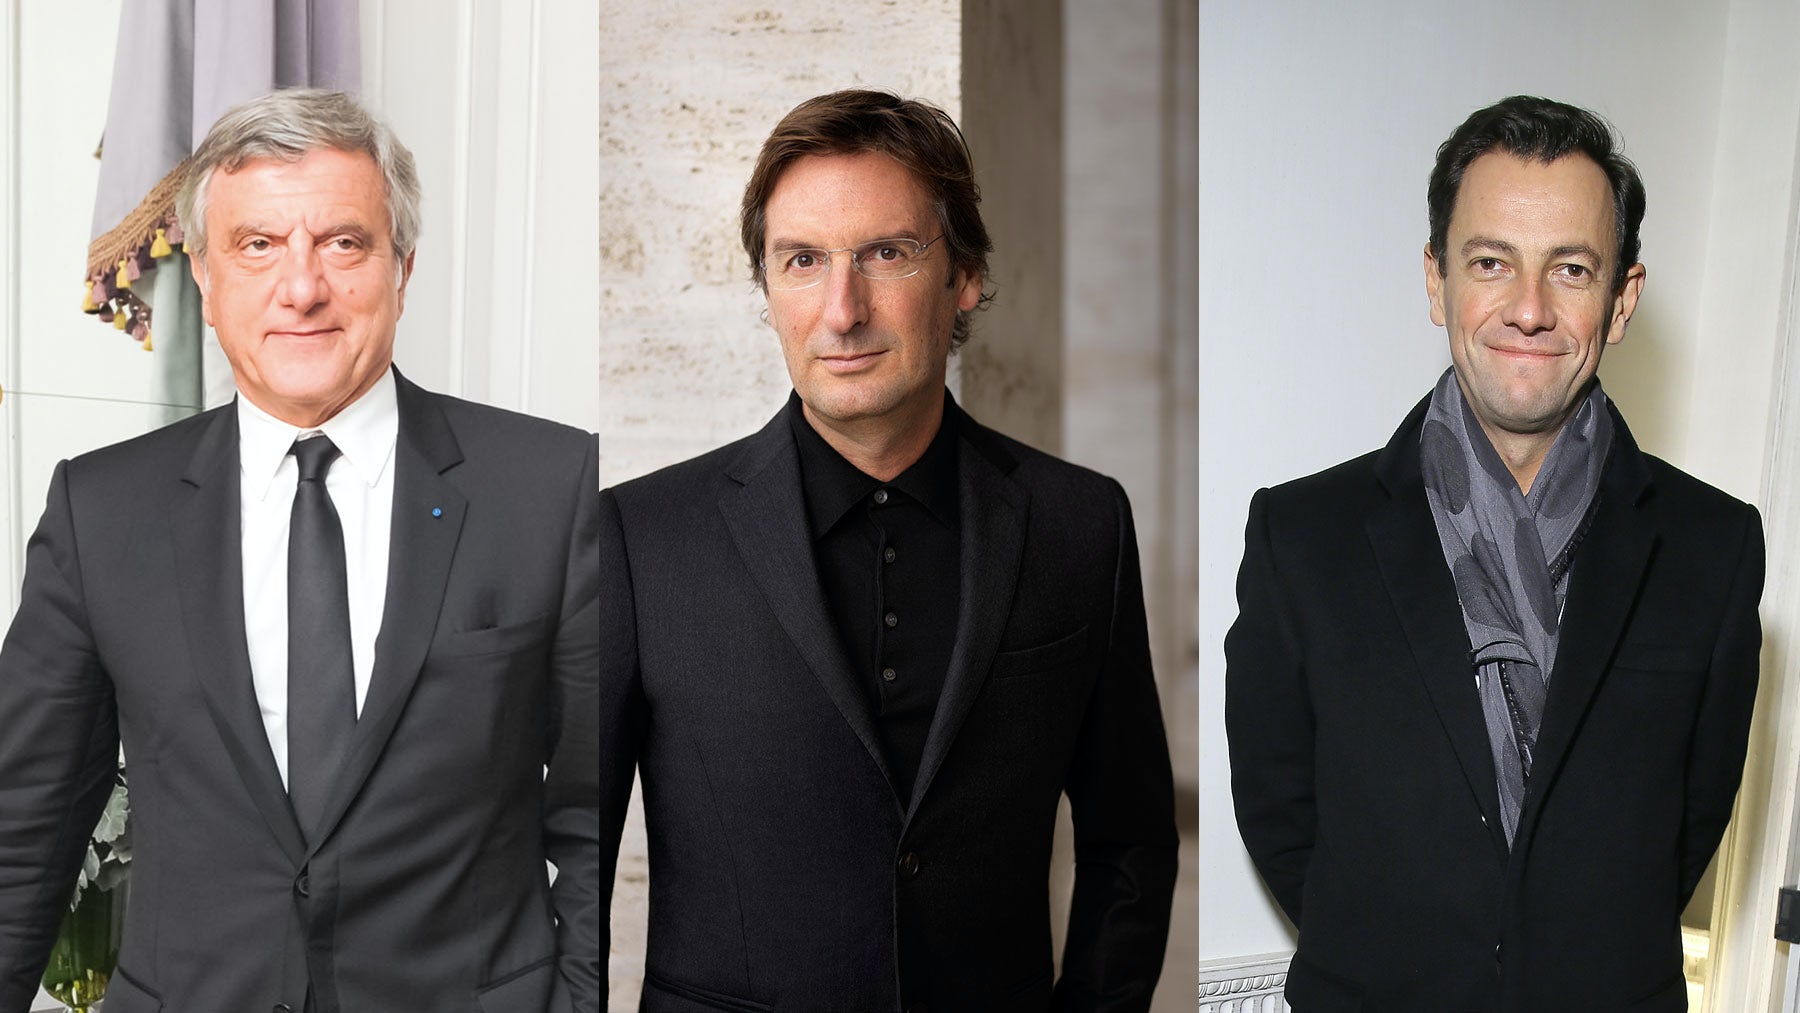 LVMH announces new appointments at Louis Vuitton and Christian Dior -  Global Cosmetics News